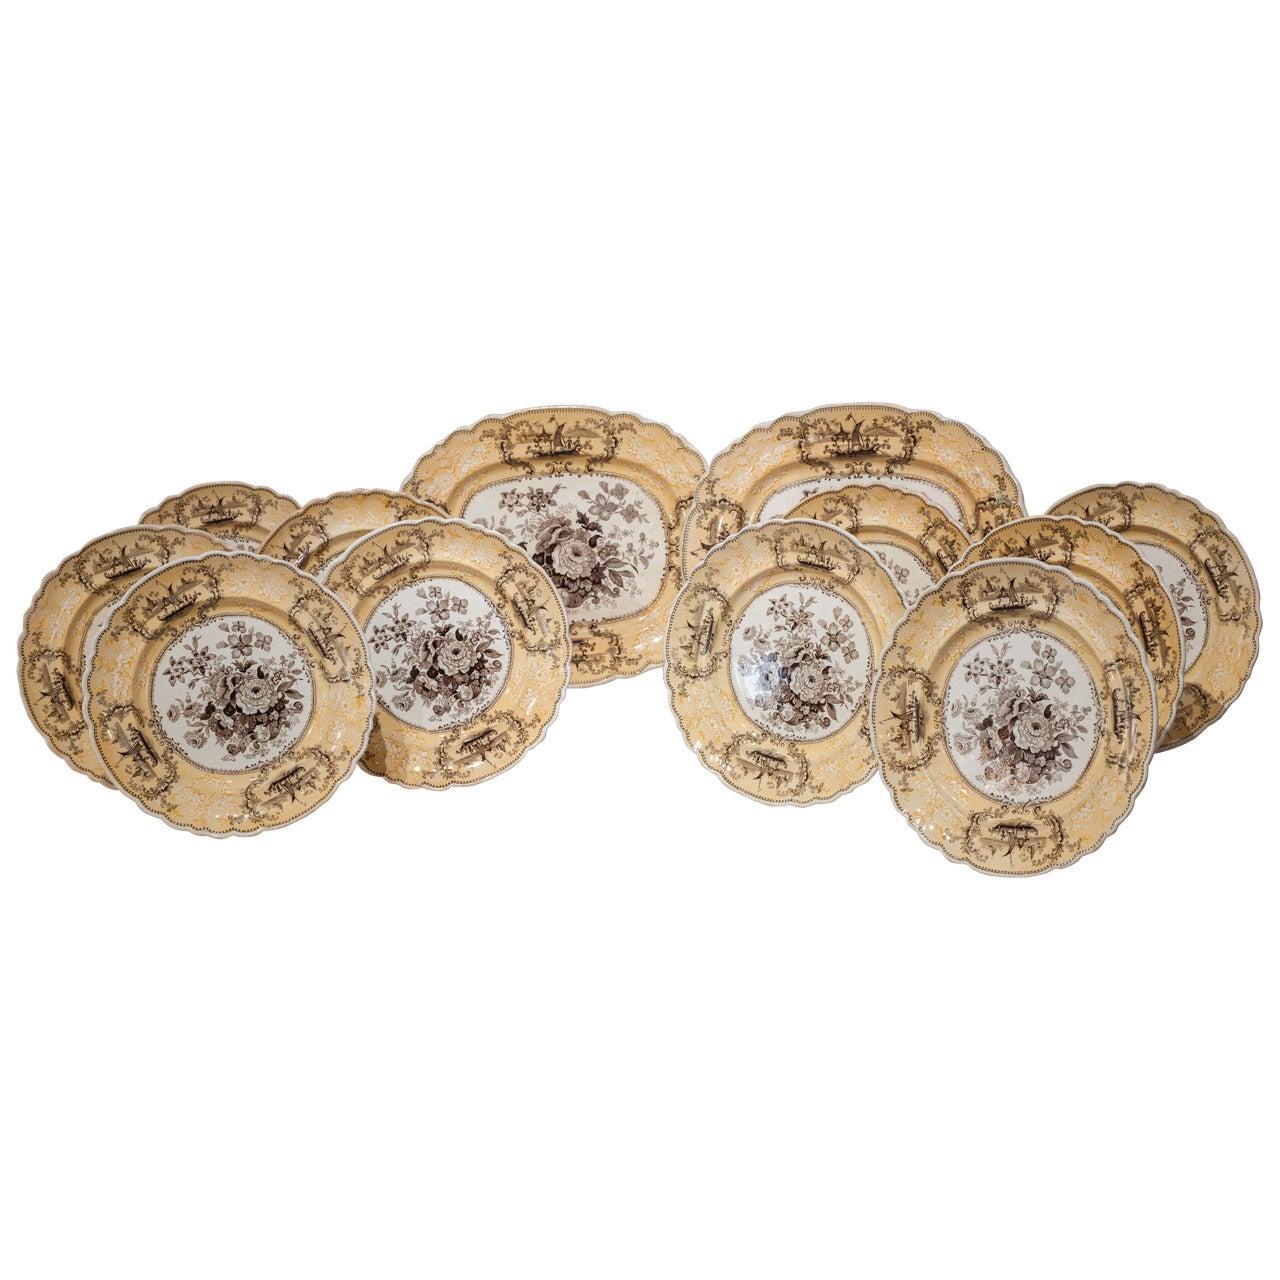 A set of ten yellow and brown transfer plates and two platters, 1840, England